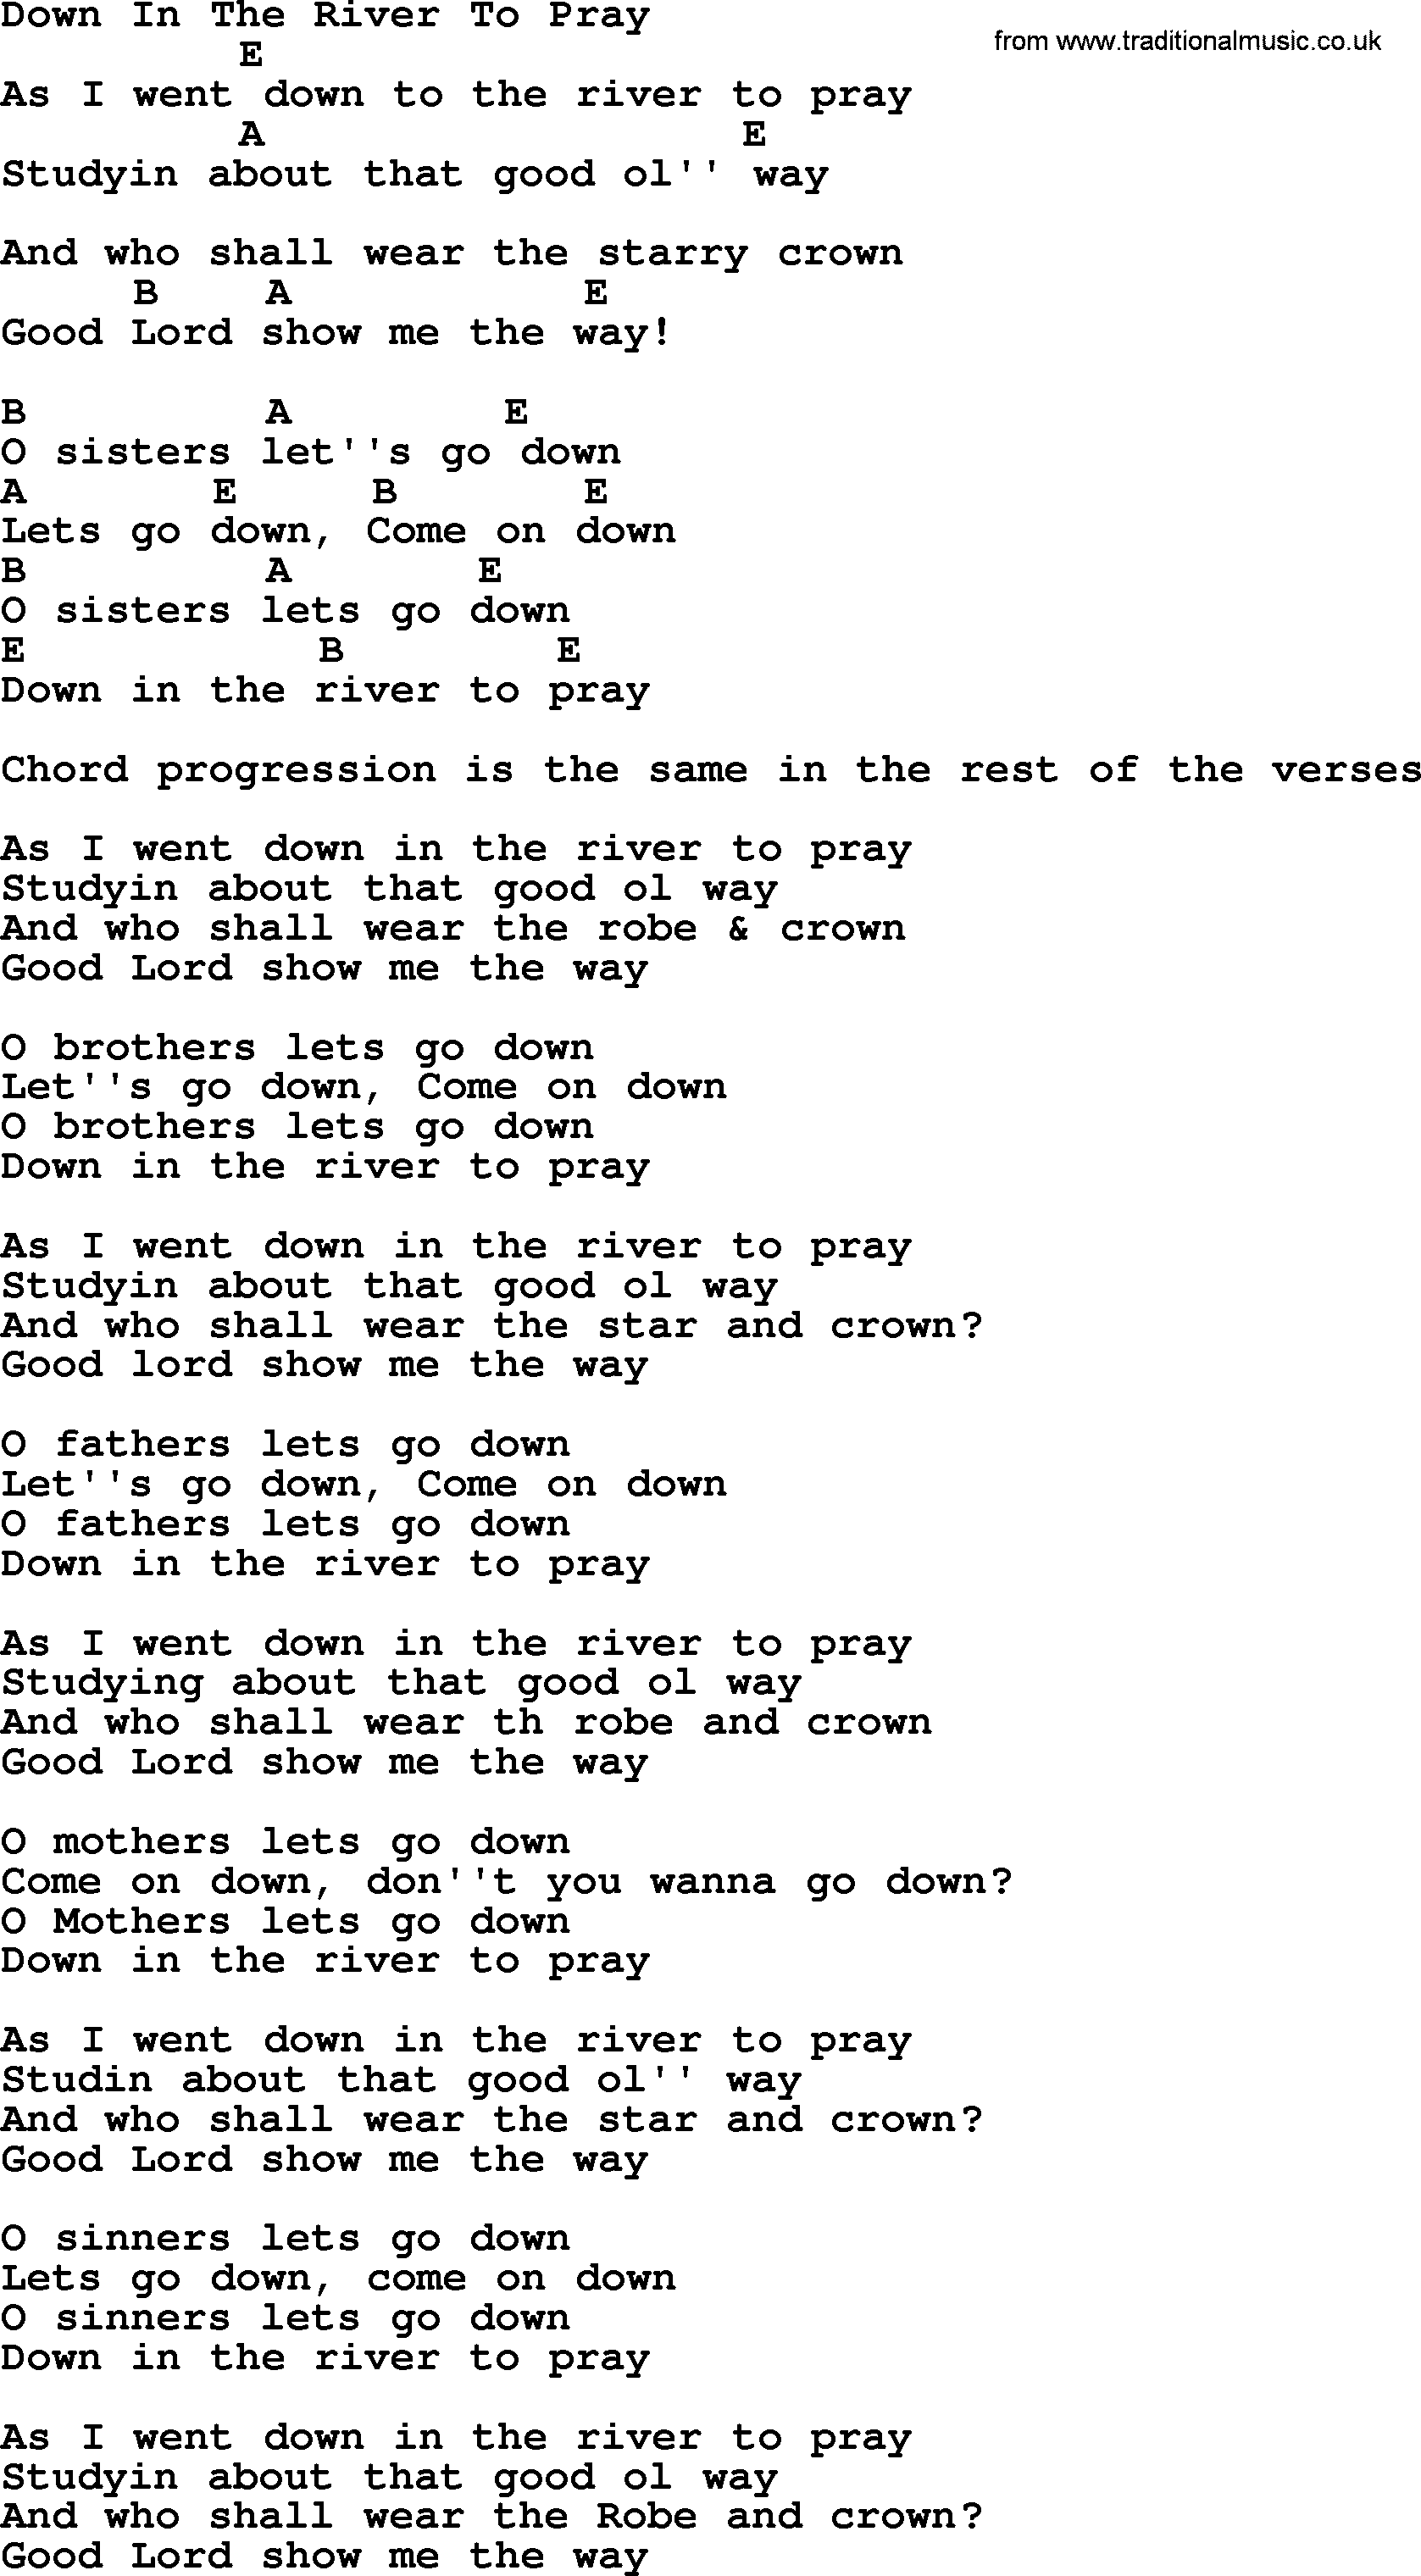 Bluegrass song: Down In The River To Pray, lyrics and chords